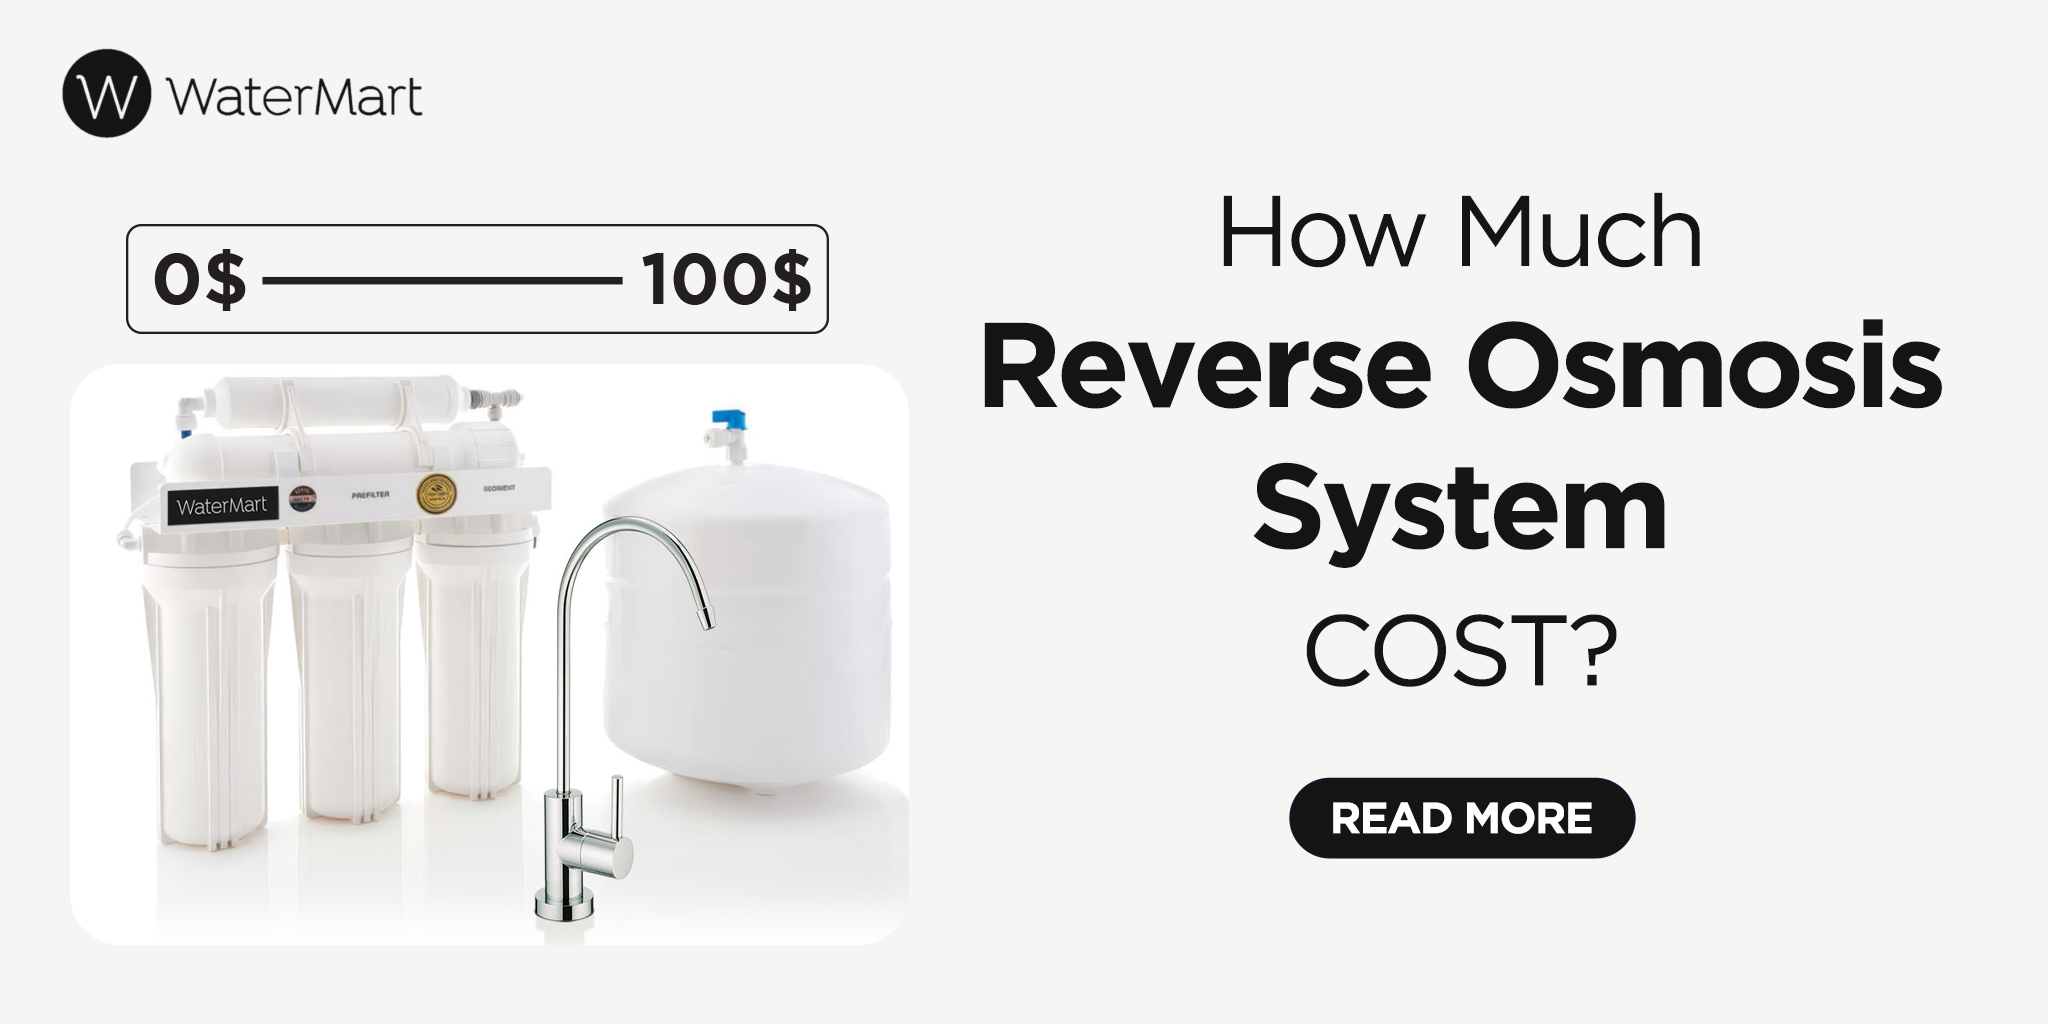 How Much Does A Reverse Osmosis System Cost?